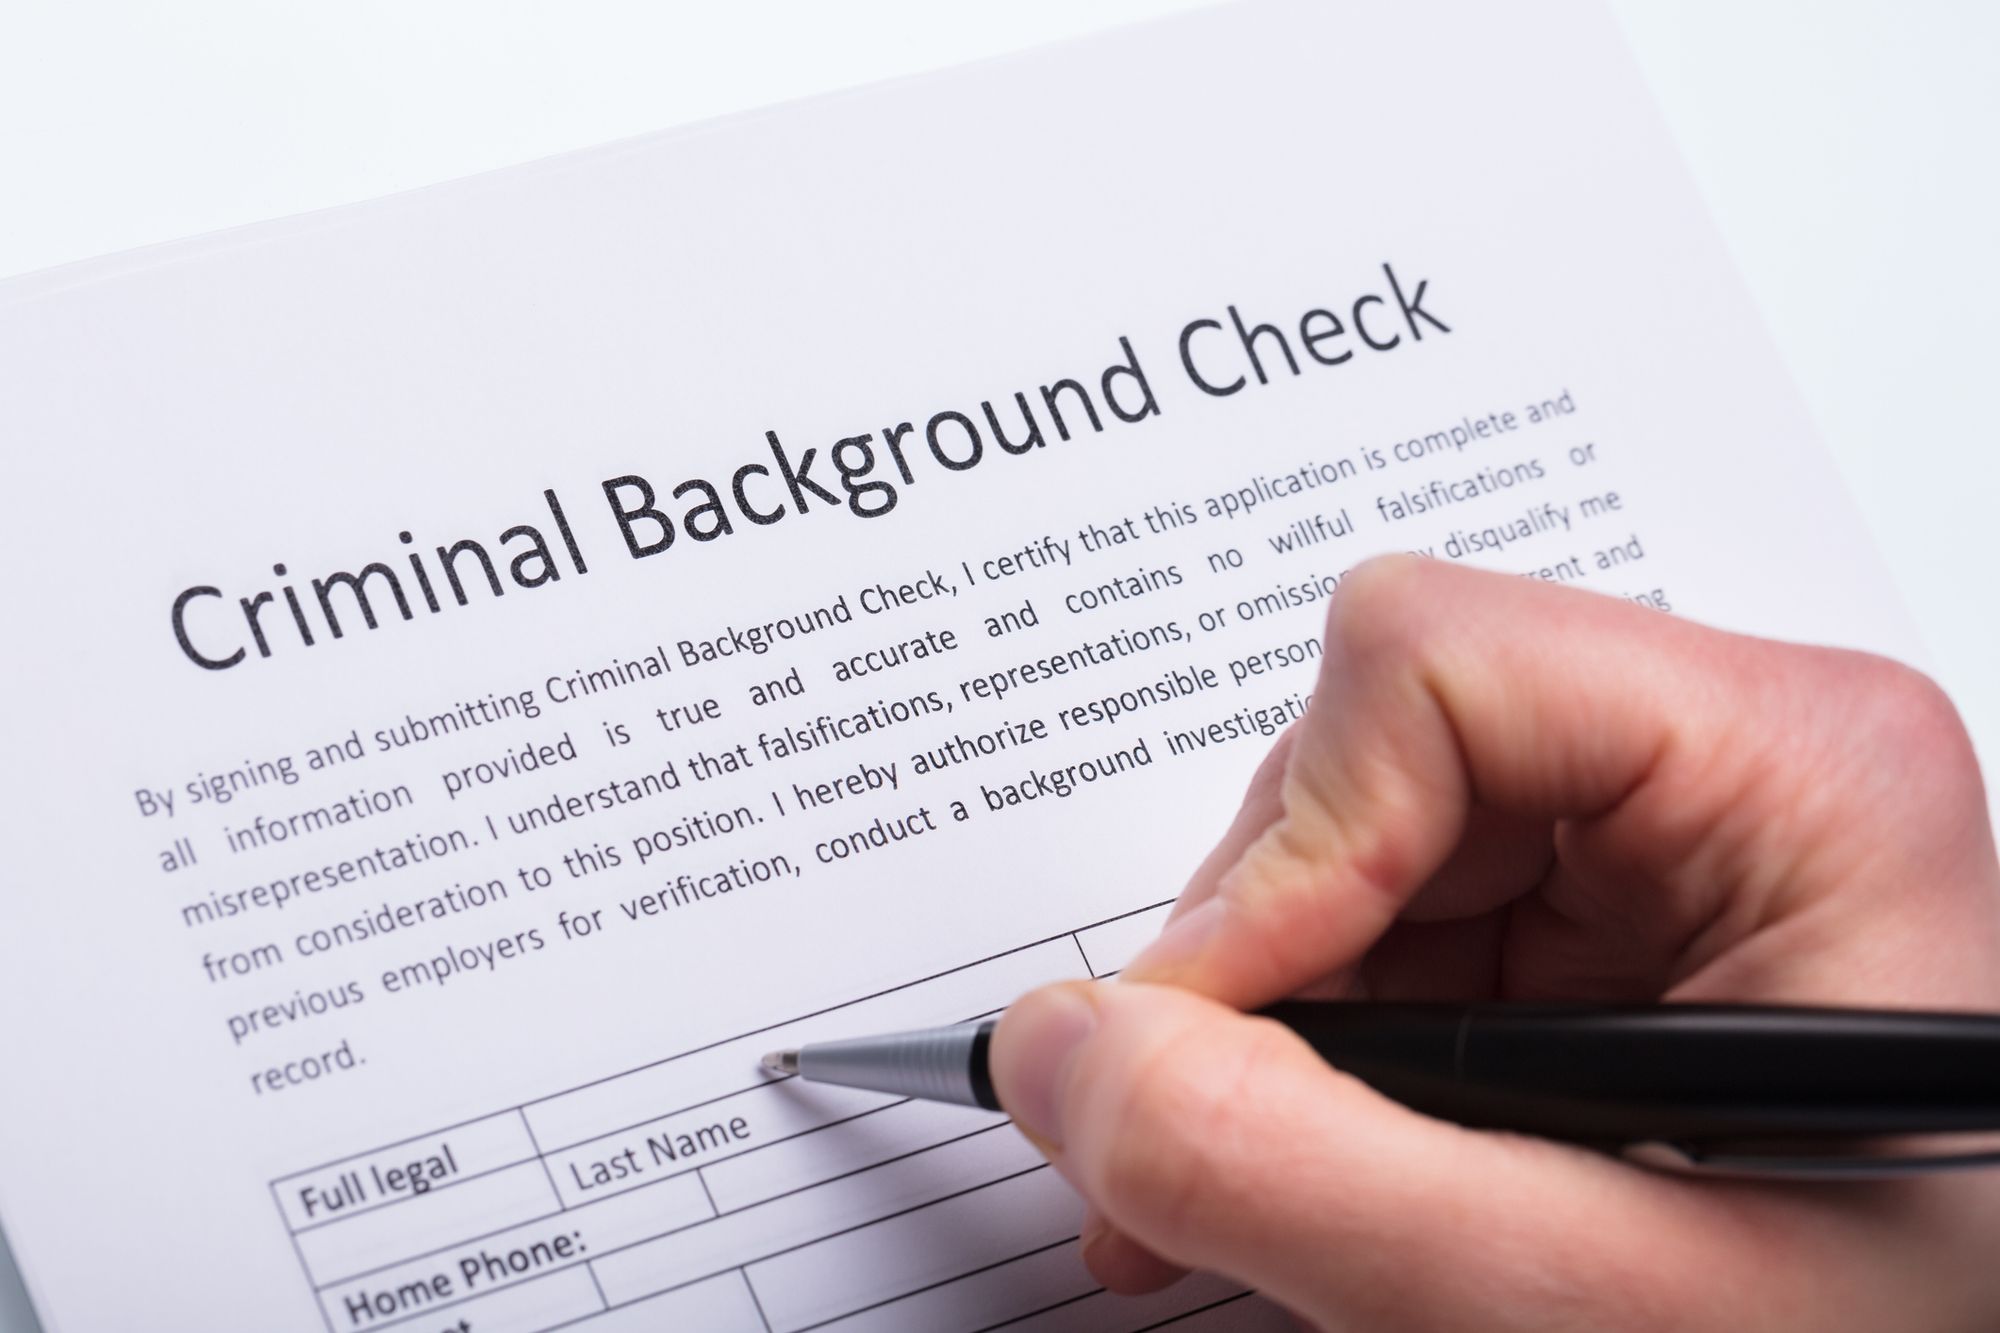 Background checks with misdemeanor